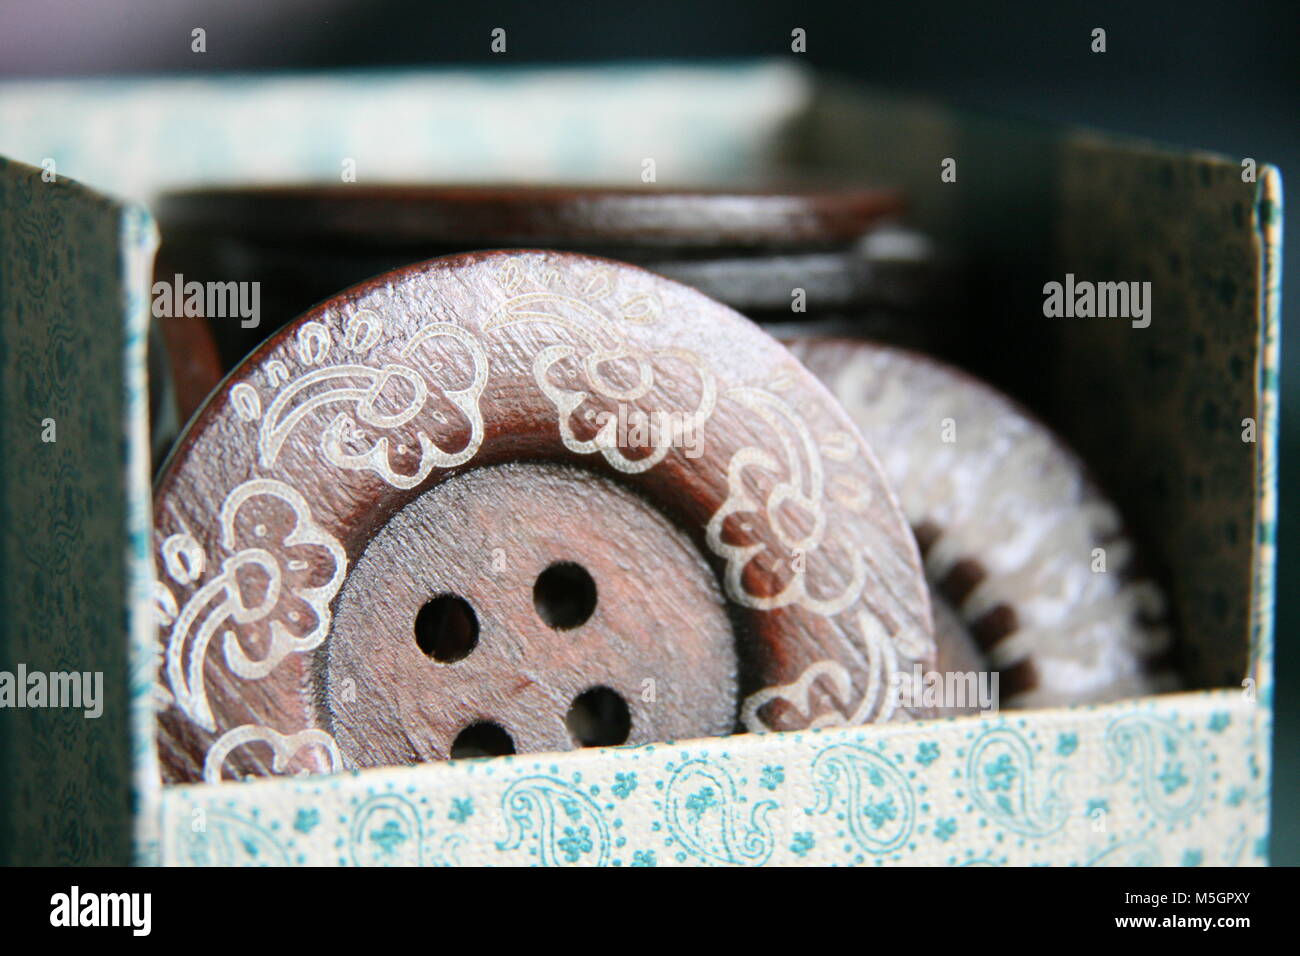 Decorative box filled with large wooden buttons Stock Photo